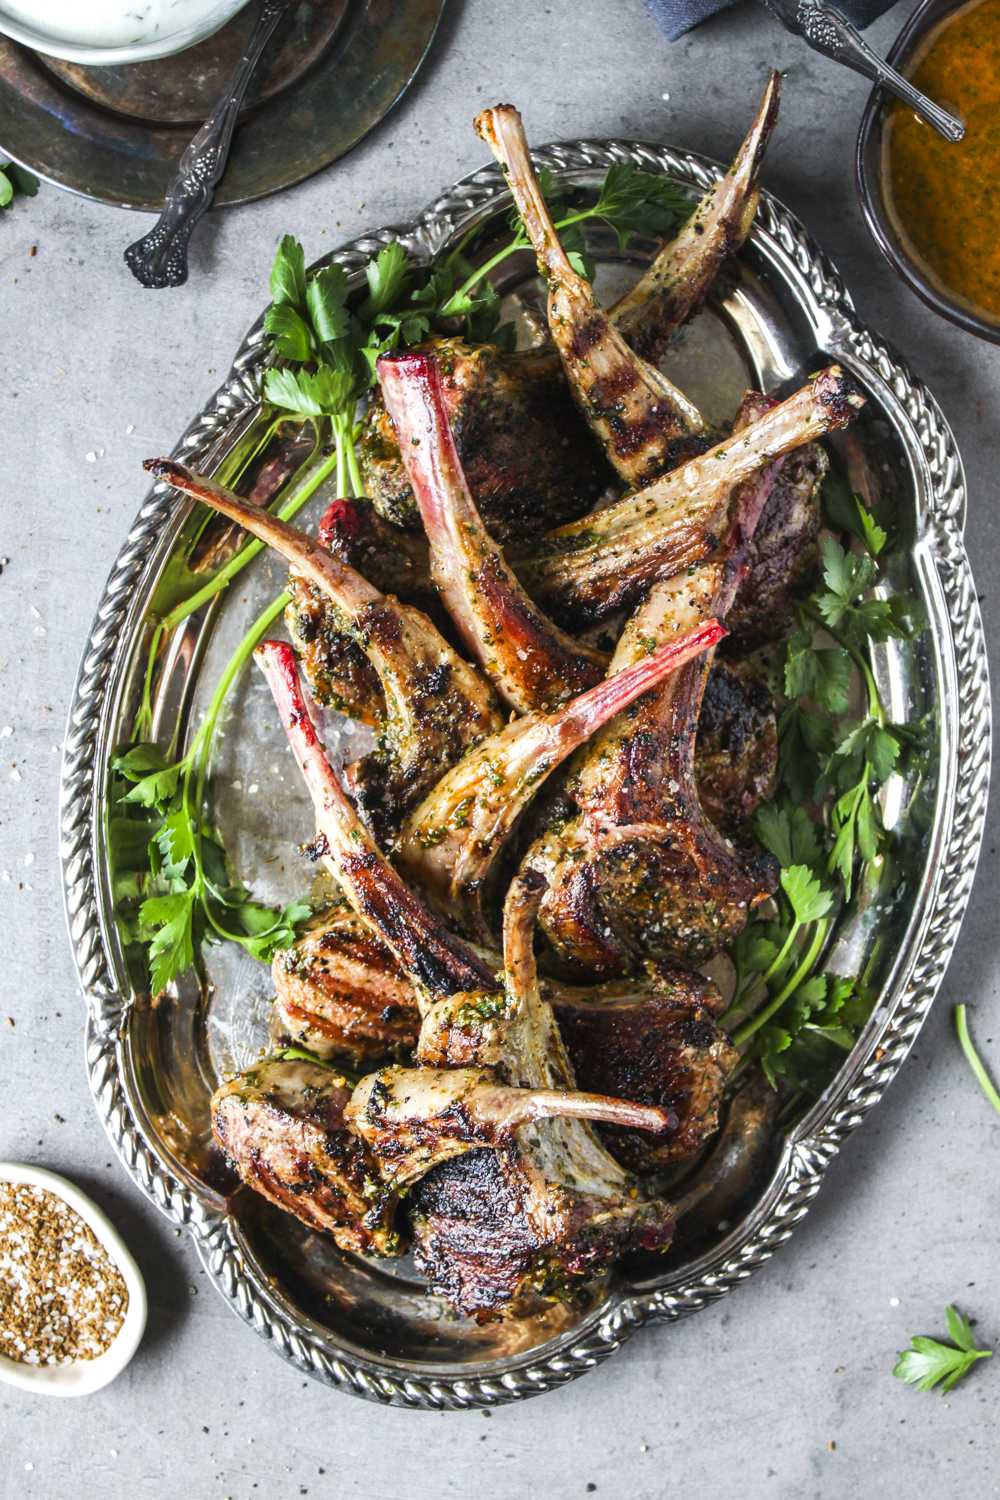 Pan seared lamb rib chops arranged on a platter with two dipping sauces - Moroccan chermoula nd yogurt garlic.